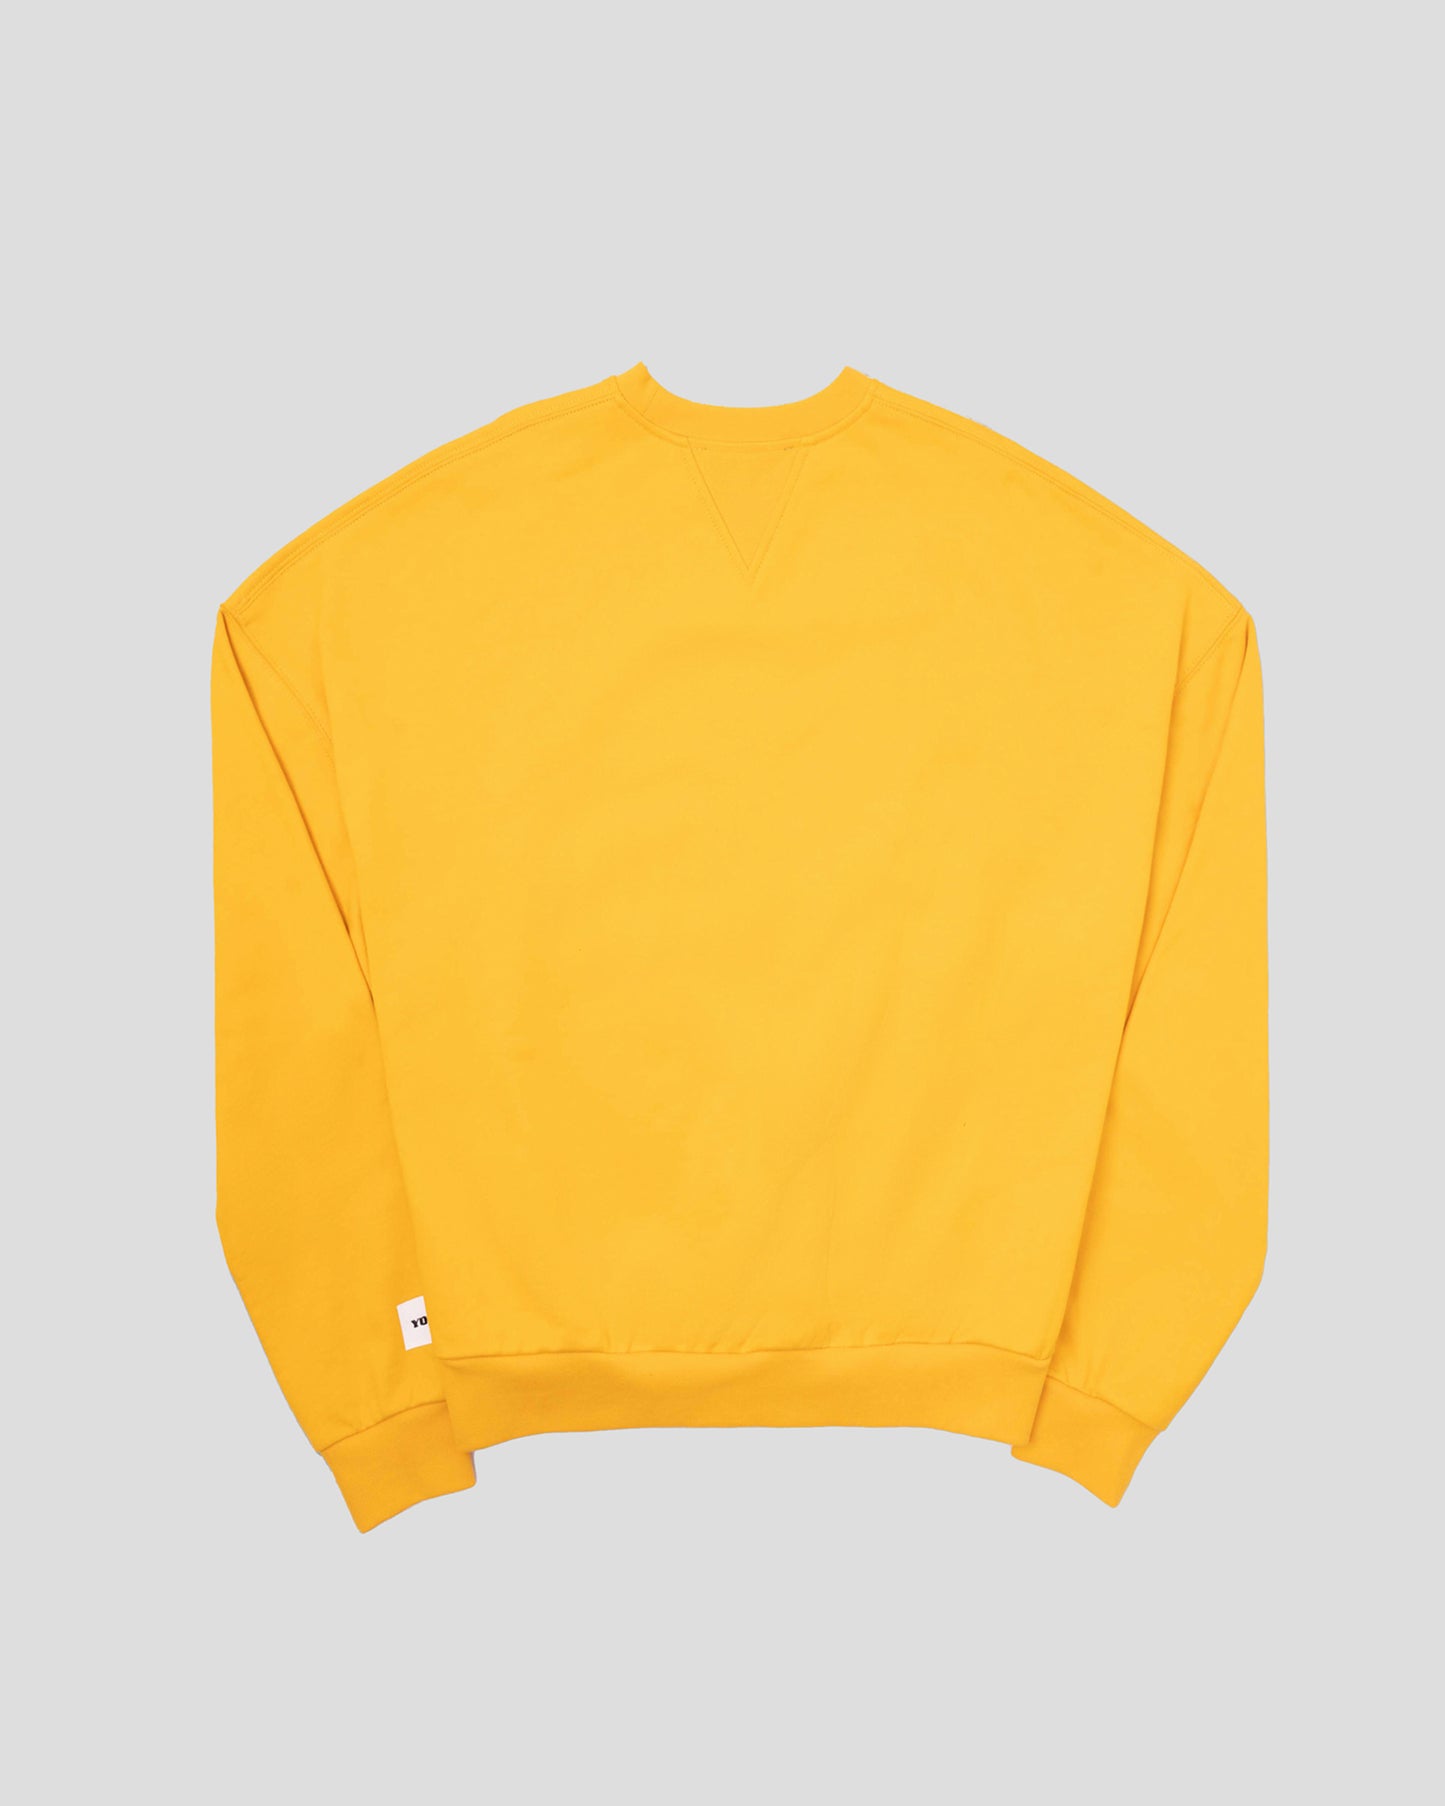 OUTHPRIVILEGE CROP SWEATER - YELLOW COLOR